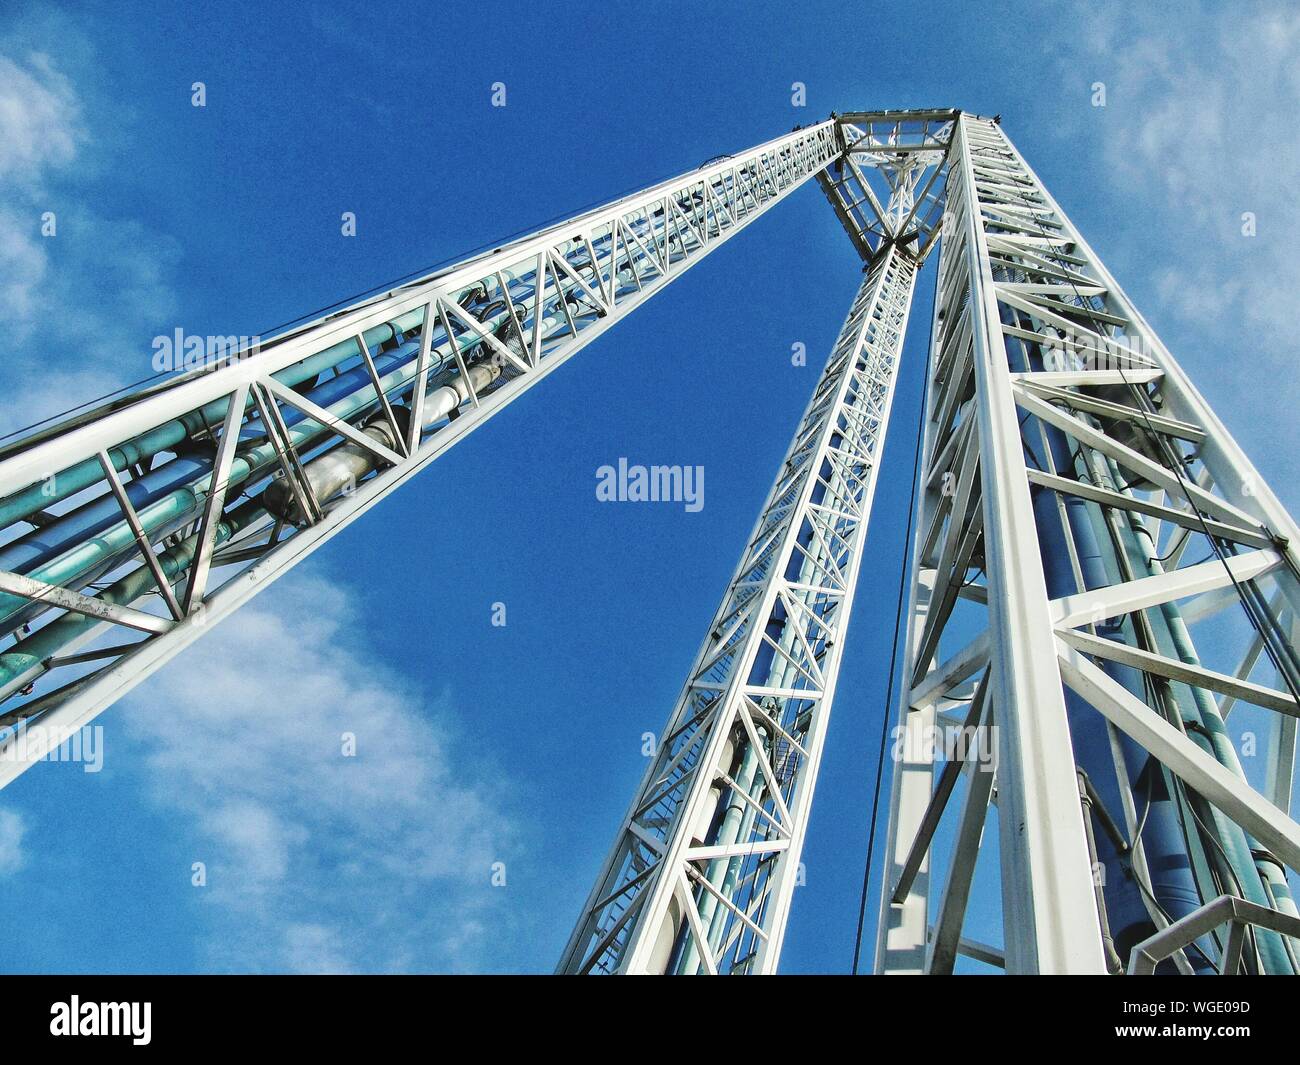 Low Angle View Of Free Falling Ride Against Blue Sky On Sunny Day Stock Photo